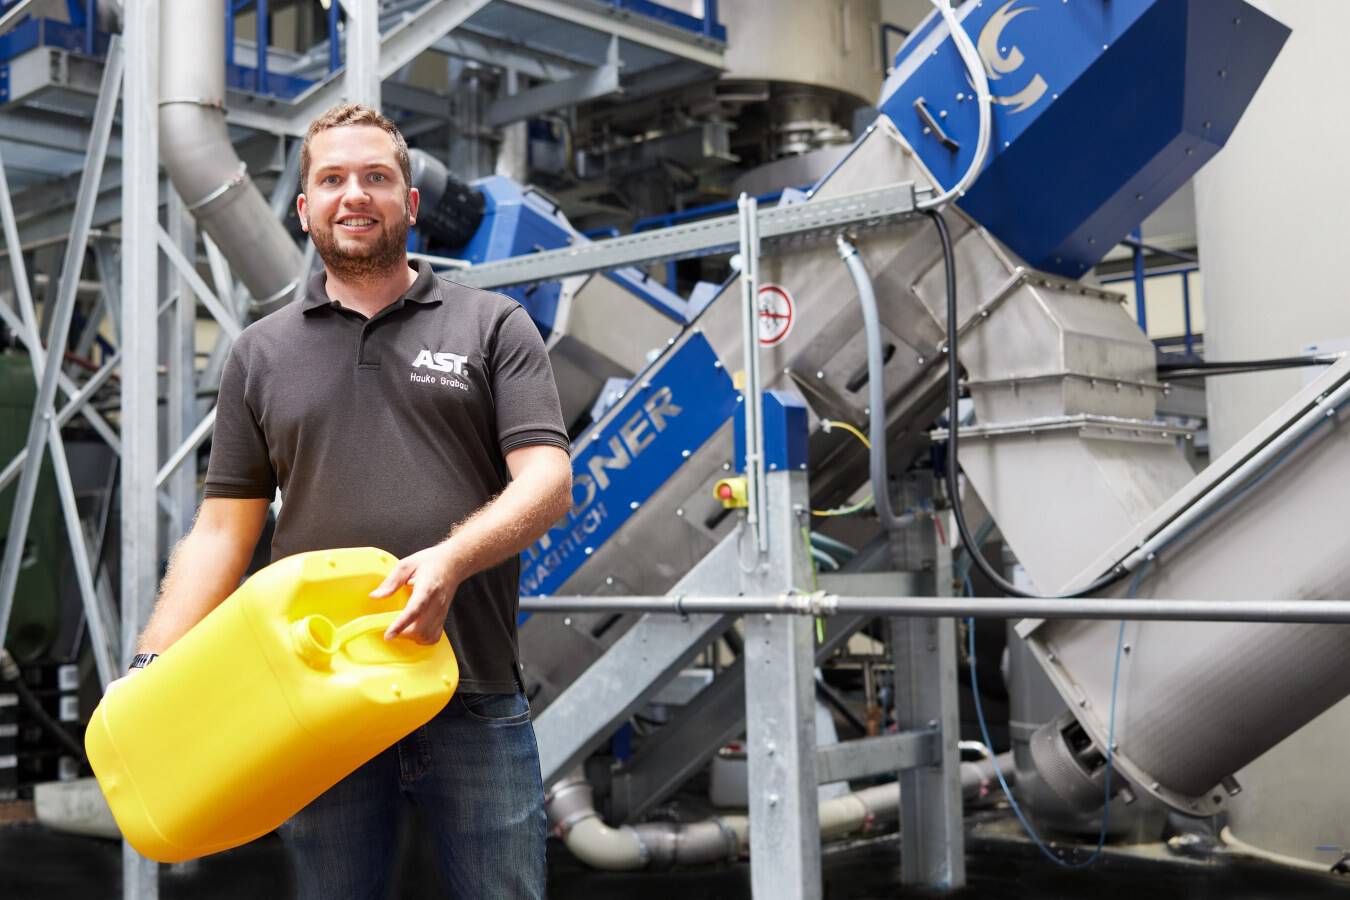 AST Group Uses Lindner Plastics Recycling Technology Circular Economy in the Spotlight: AST Group Uses Lindner Plastics
Recycling Technology to Close the Loop  